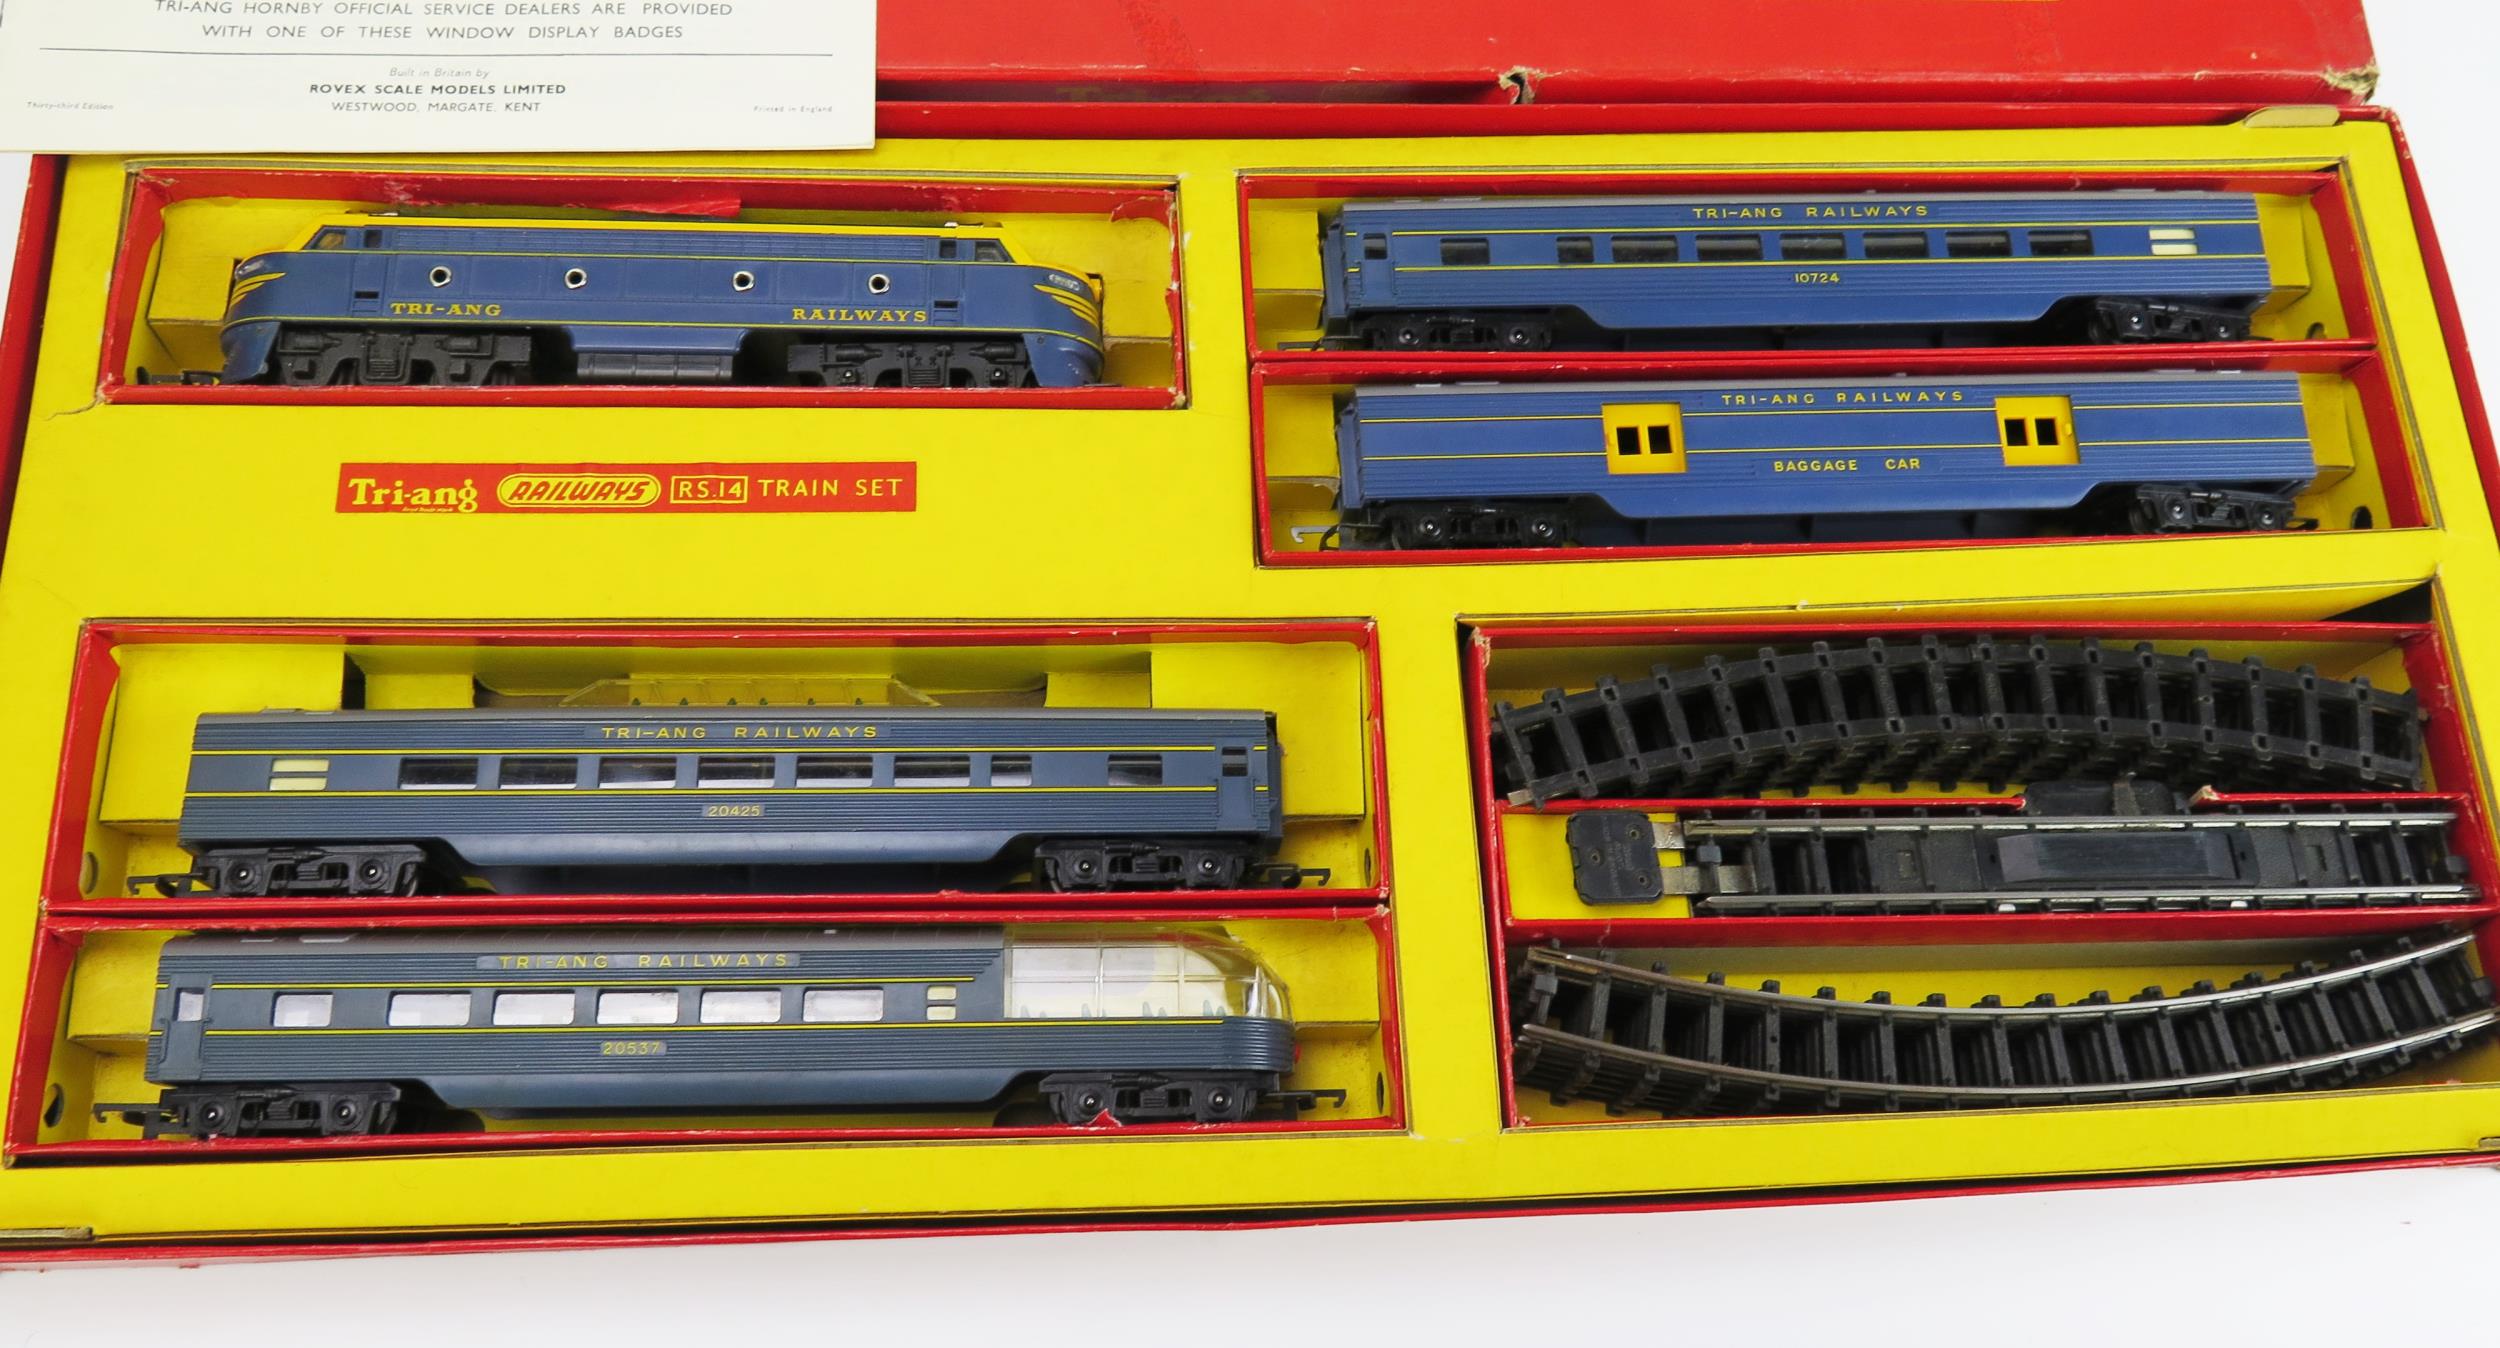 Triang Railways OO Gauge RS14 Transcontinental Passenger Train Set in blue/yellow with Double - Image 2 of 2